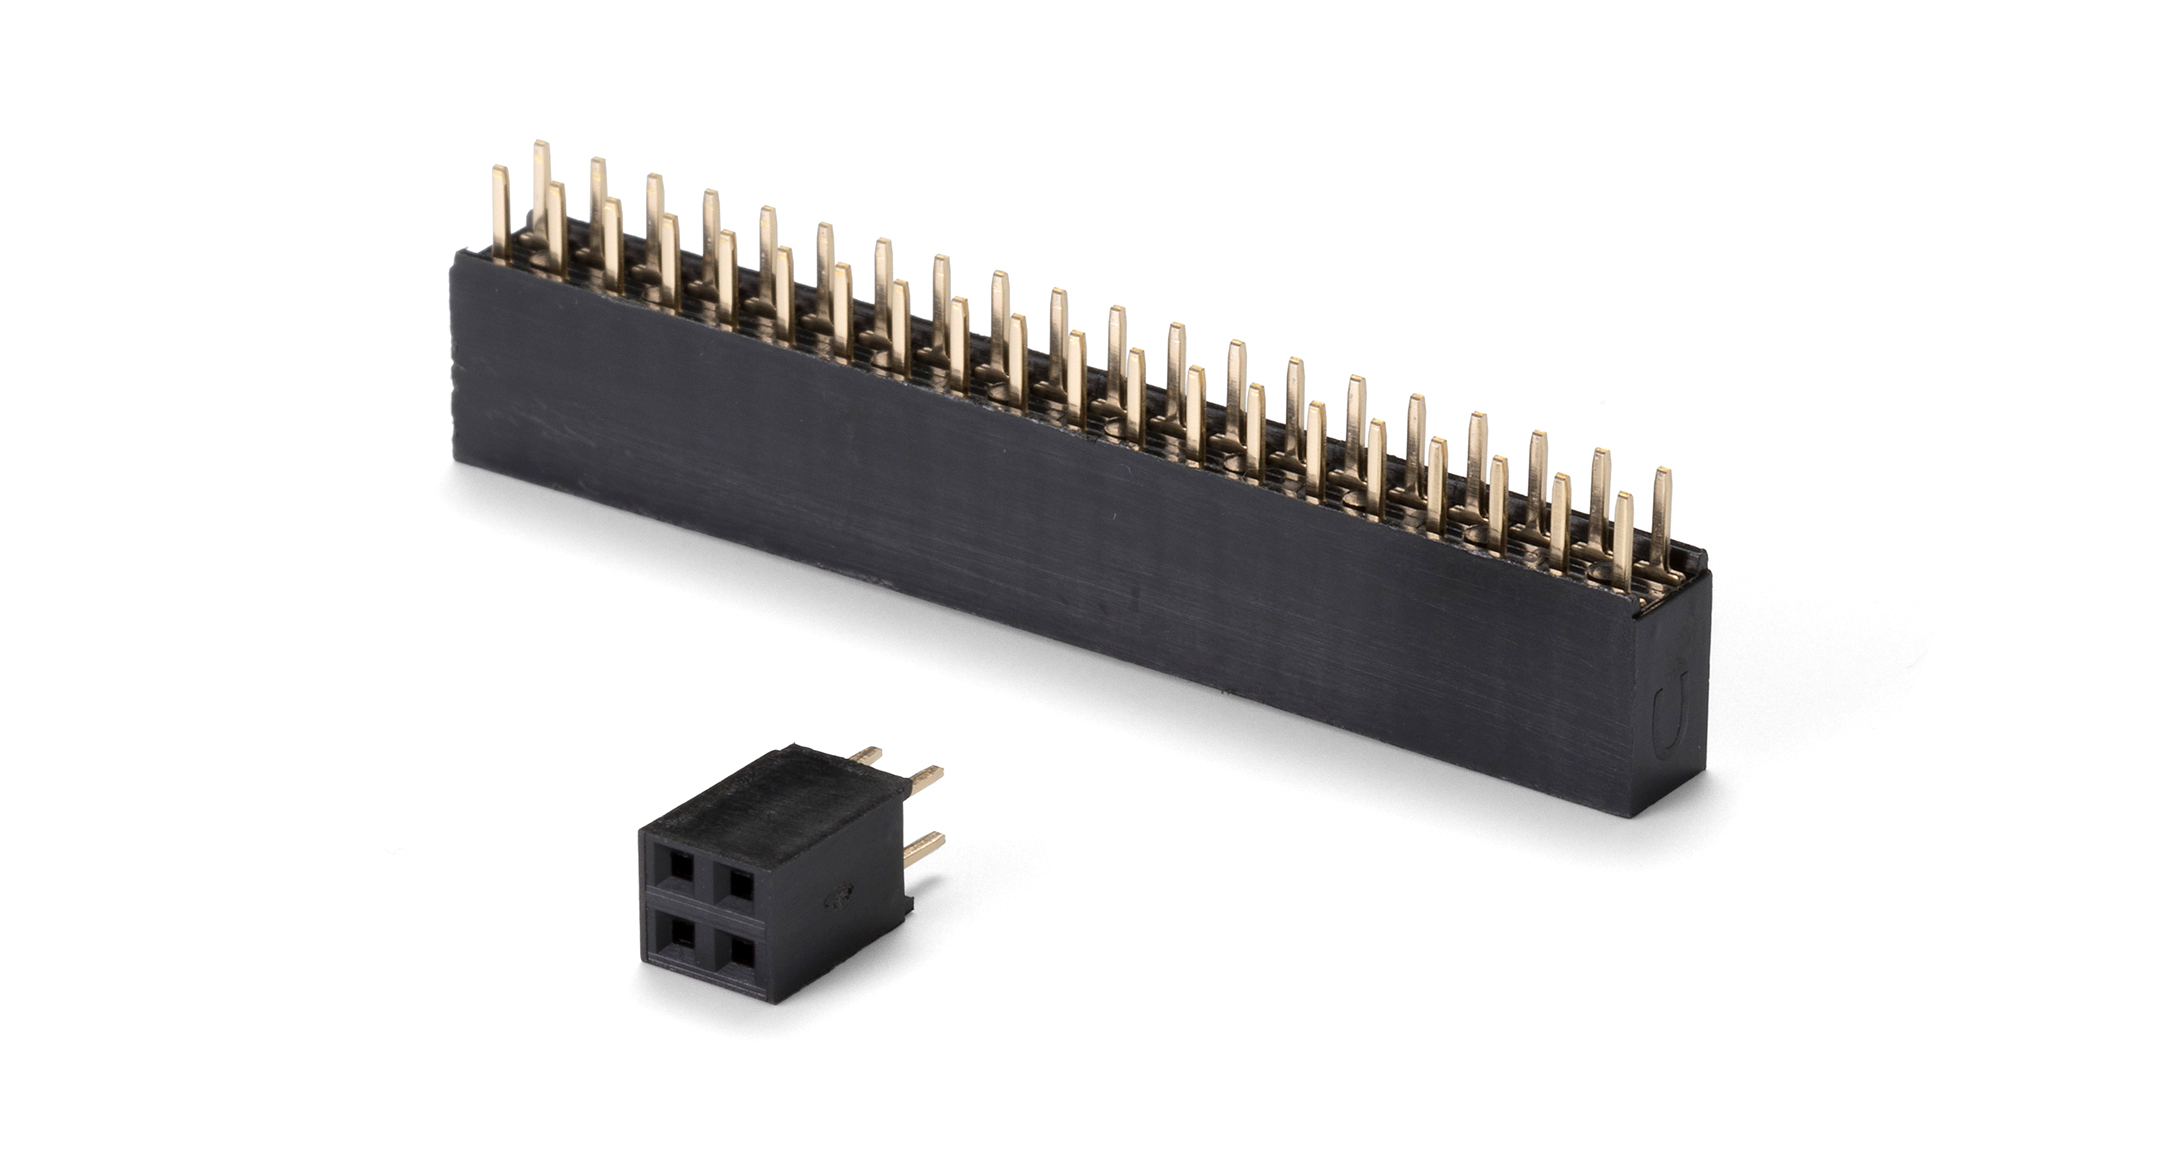 PIN SOCKET CONNECTOR for RPCB-4B Raspberry Pi EXPANSION PCB1